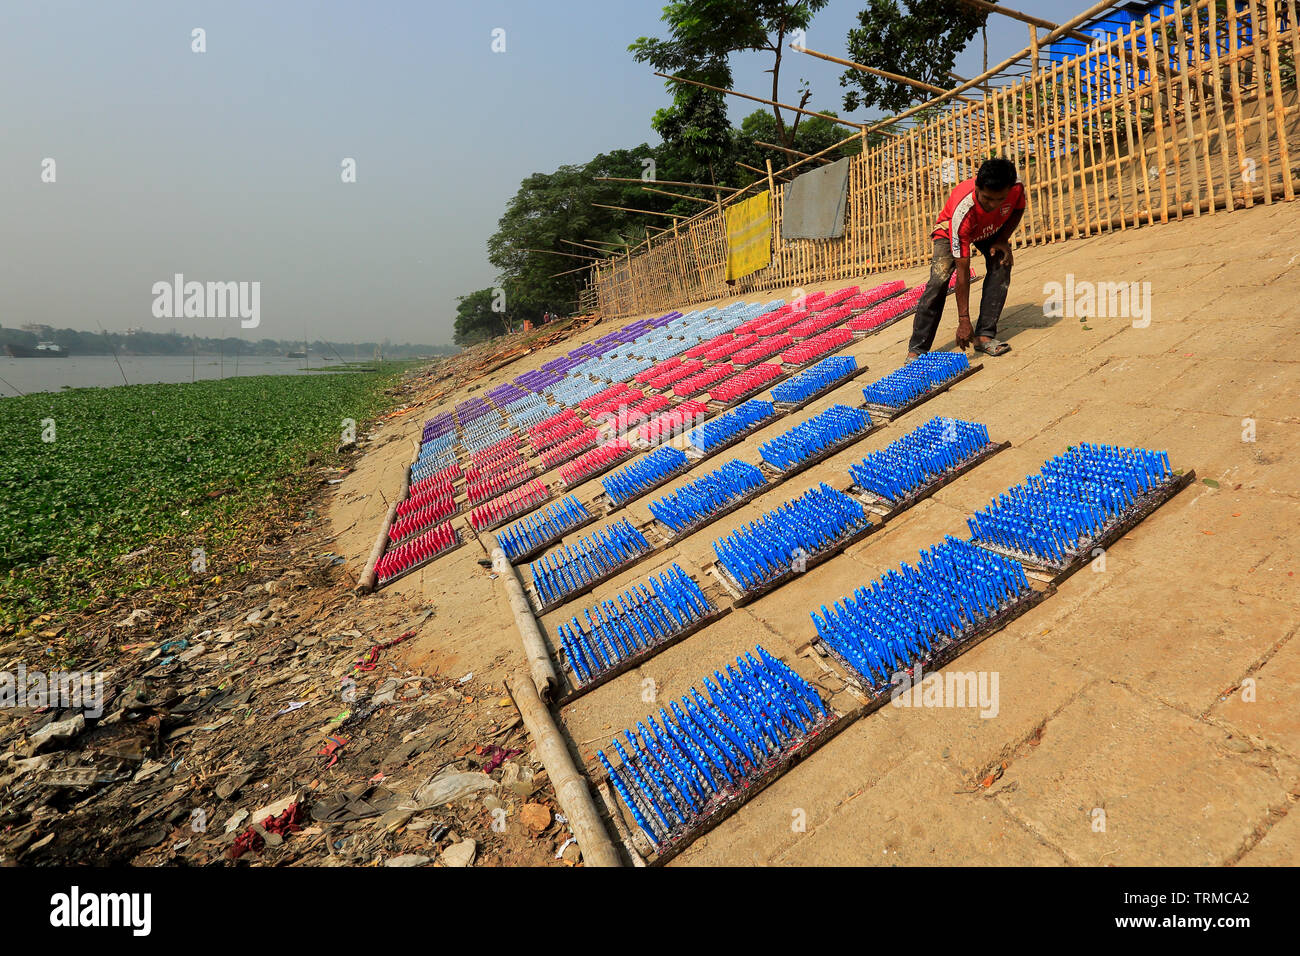 A laborer dries racks of rubber balloon in the sun as he works at a balloon factory in Dhaka, Bangladesh. Stock Photo